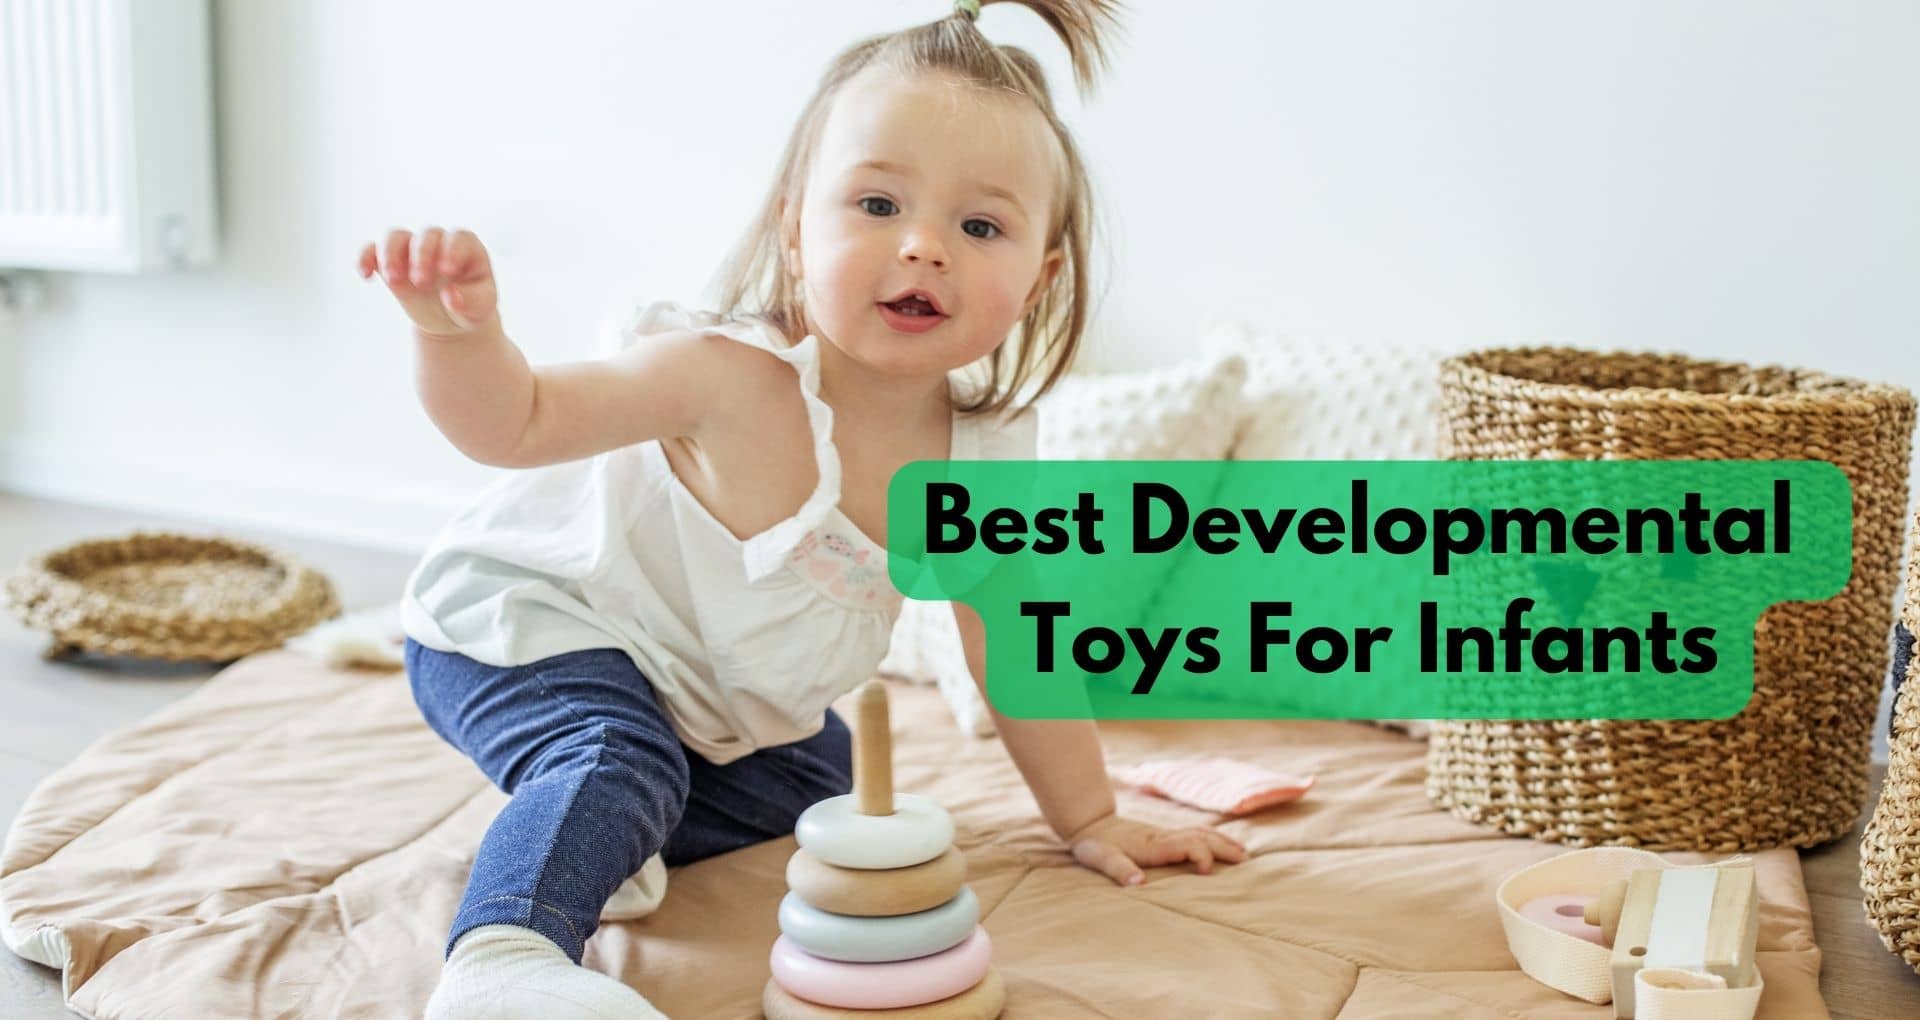 What Are The Best Developmental Toys For Infants?